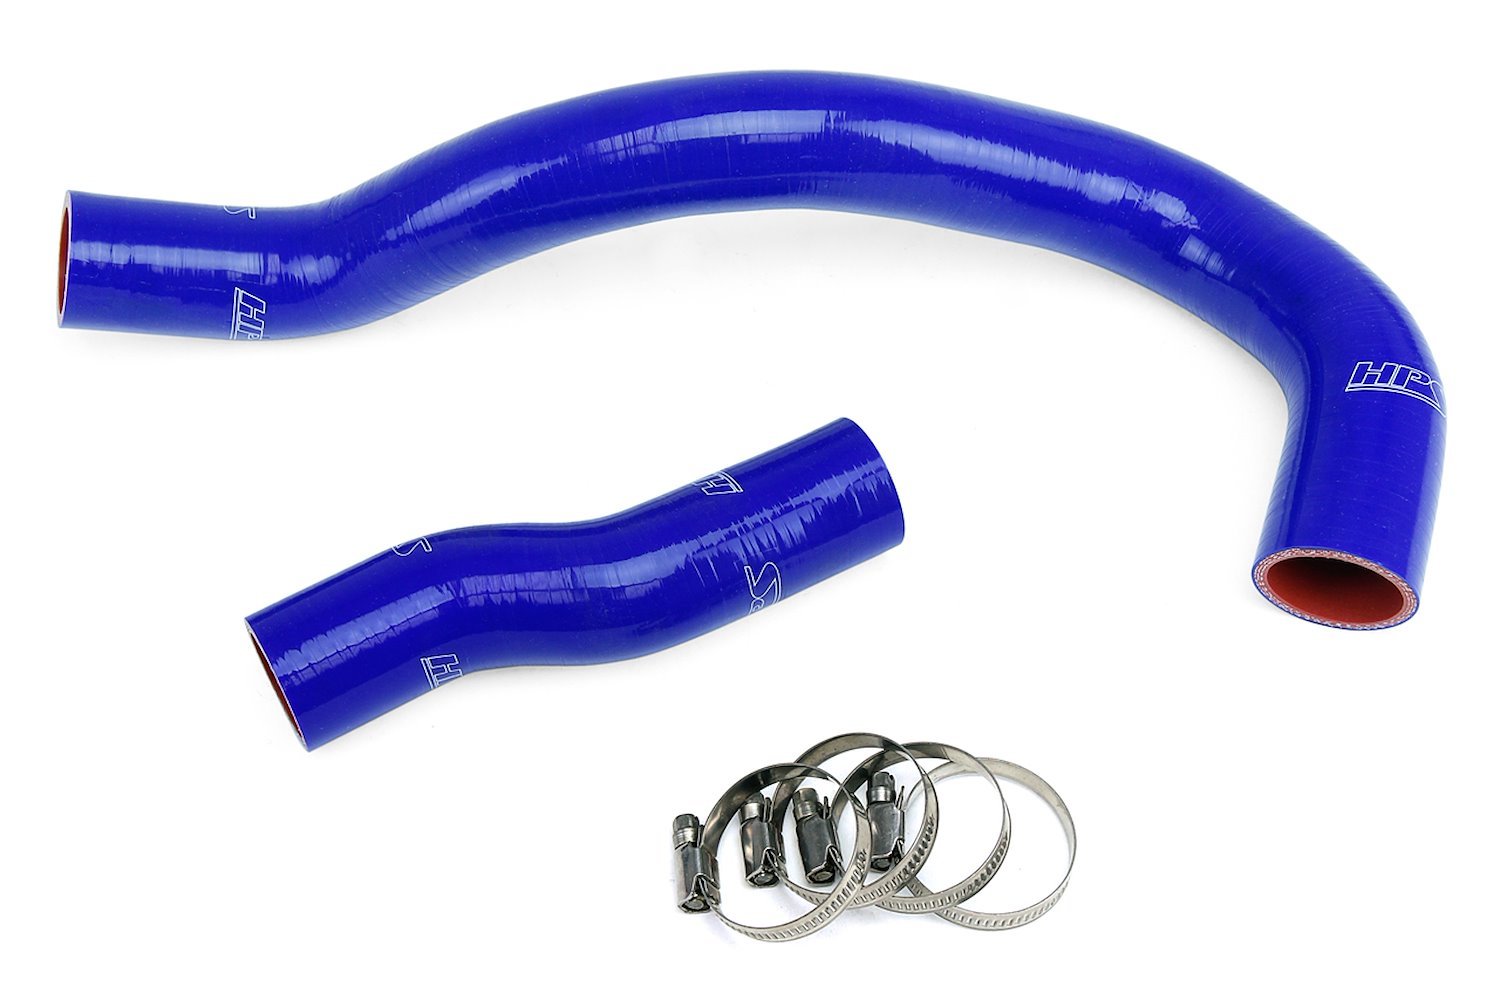 57-1266-BLUE Radiator Hose Kit, High-Temp 3-Ply Reinforced Silicone, Replace OEM Rubber Radiator Coolant Hoses